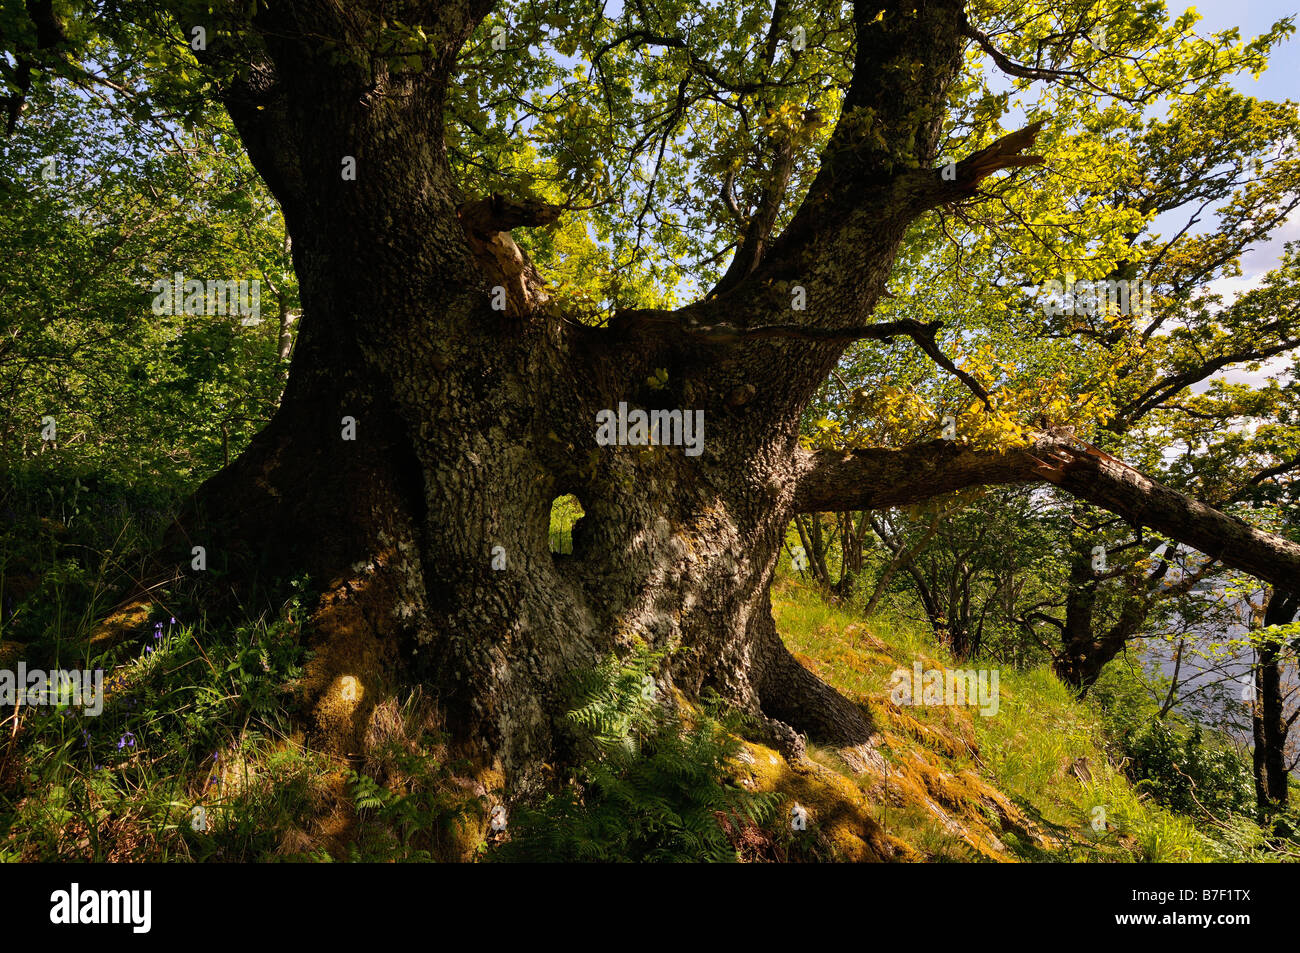 Mature oak tree in summer foliage with a hole right through the main trunk in woodland near Killin Perthshire Scotland UK Stock Photo